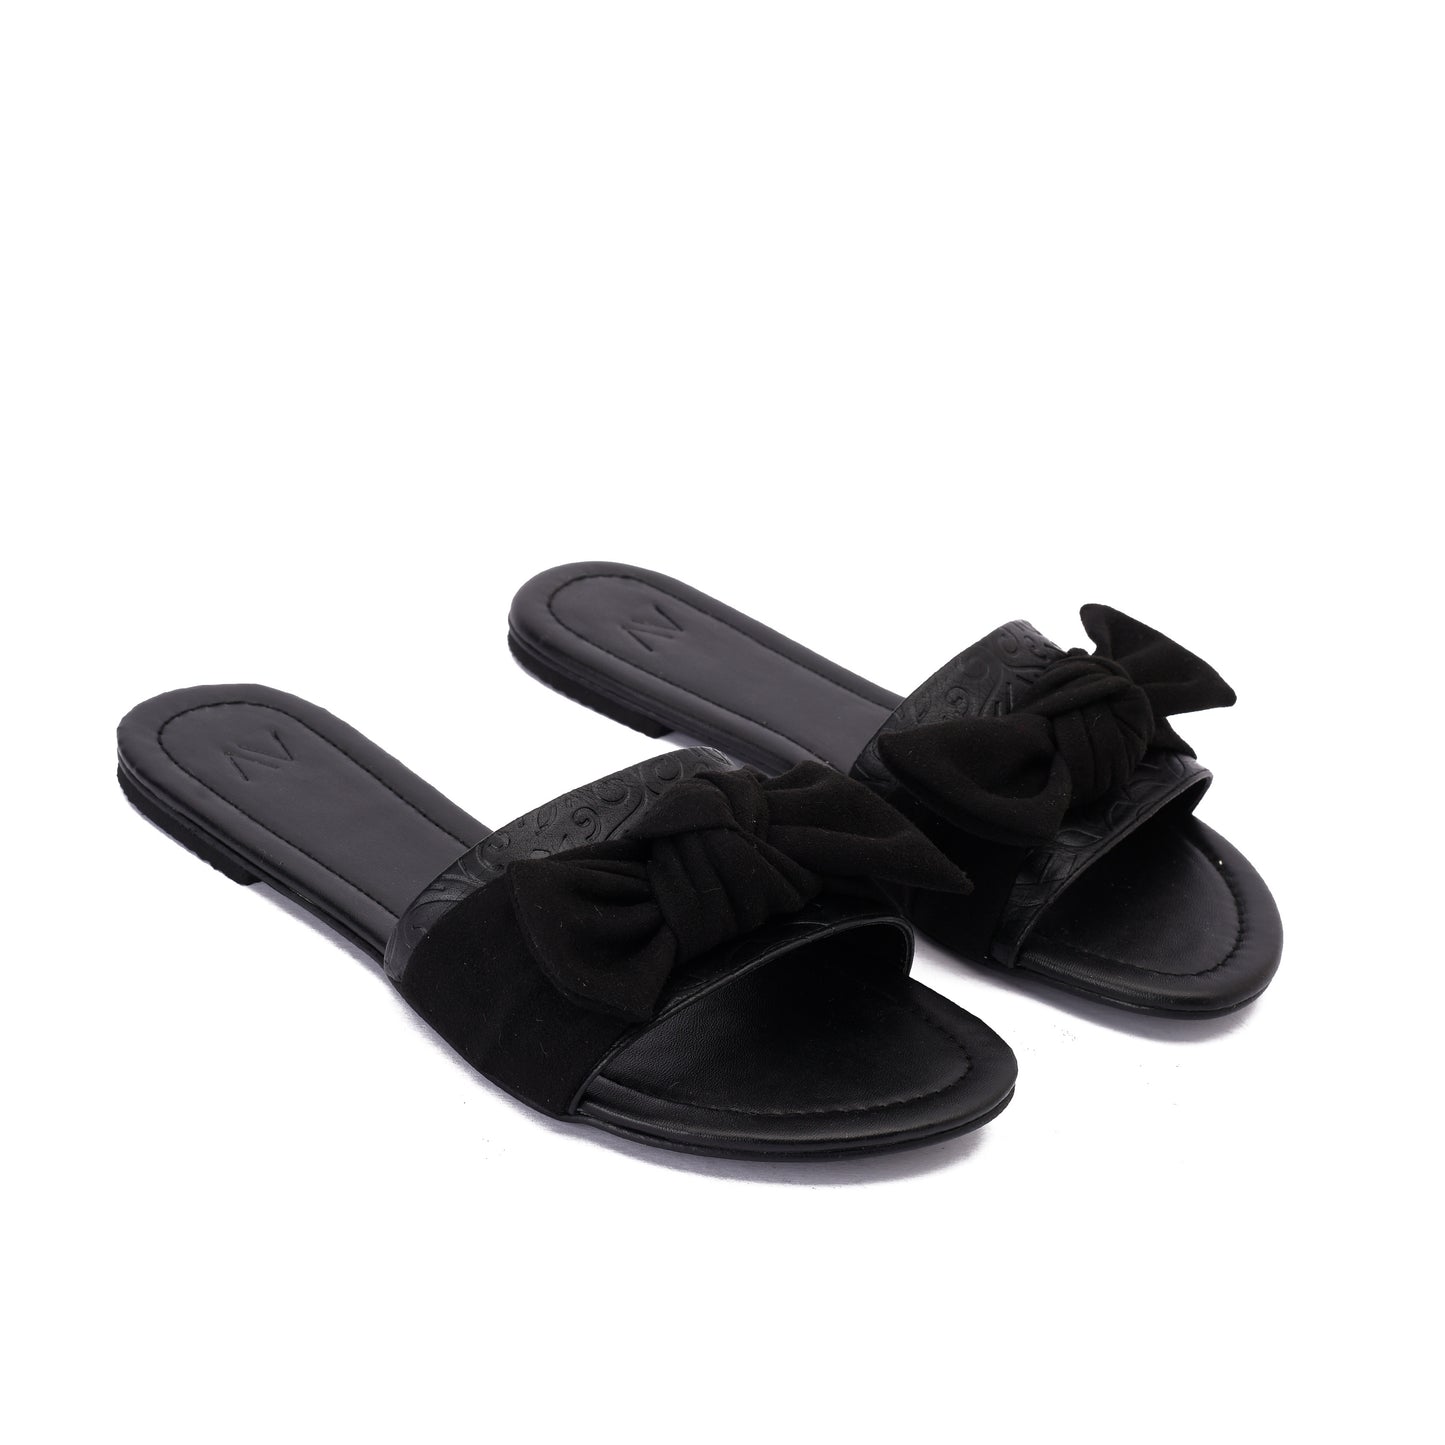 Bow Black Slippers -Code 6009